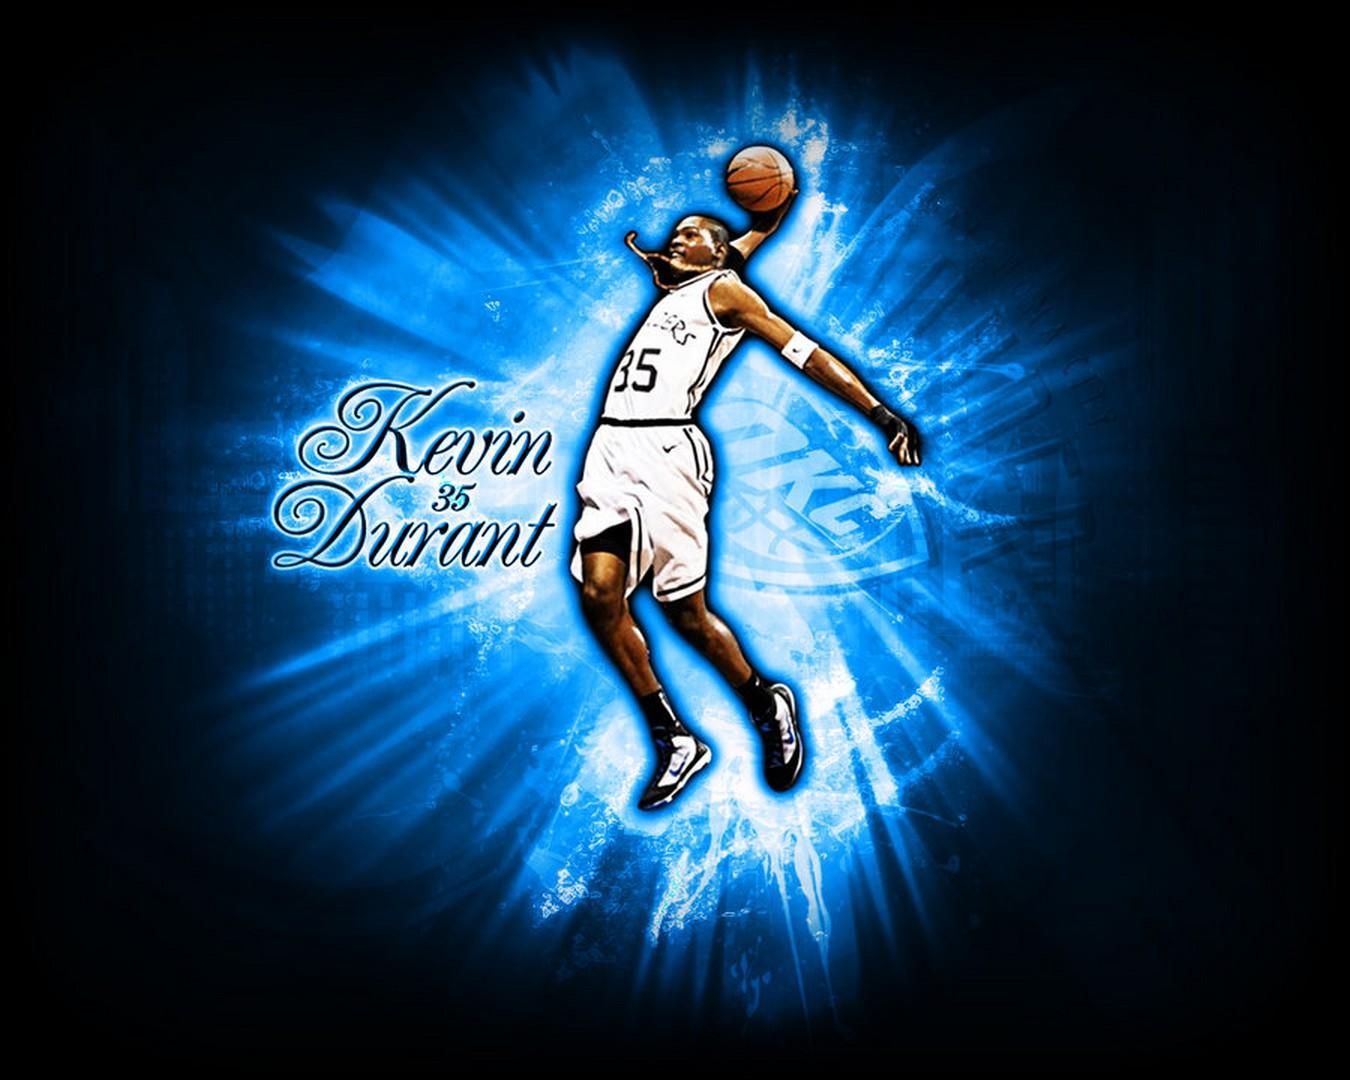 Kevin Durant Wallpapers Hd Wallpapers Inn | HD Wallpapers Range